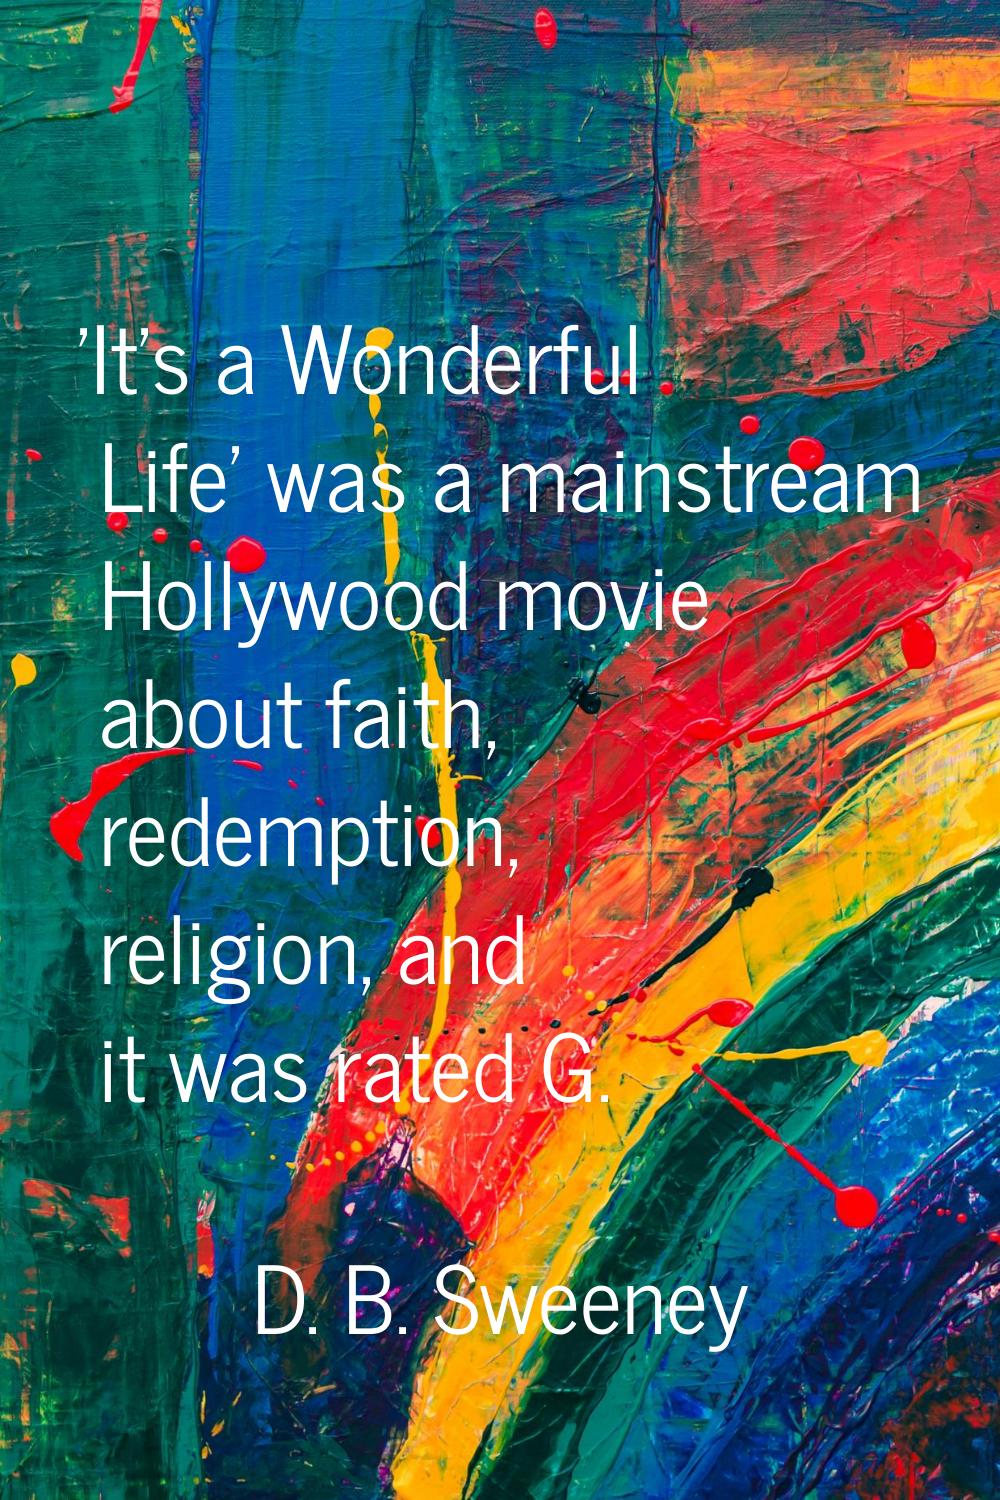 'It's a Wonderful Life' was a mainstream Hollywood movie about faith, redemption, religion, and it 